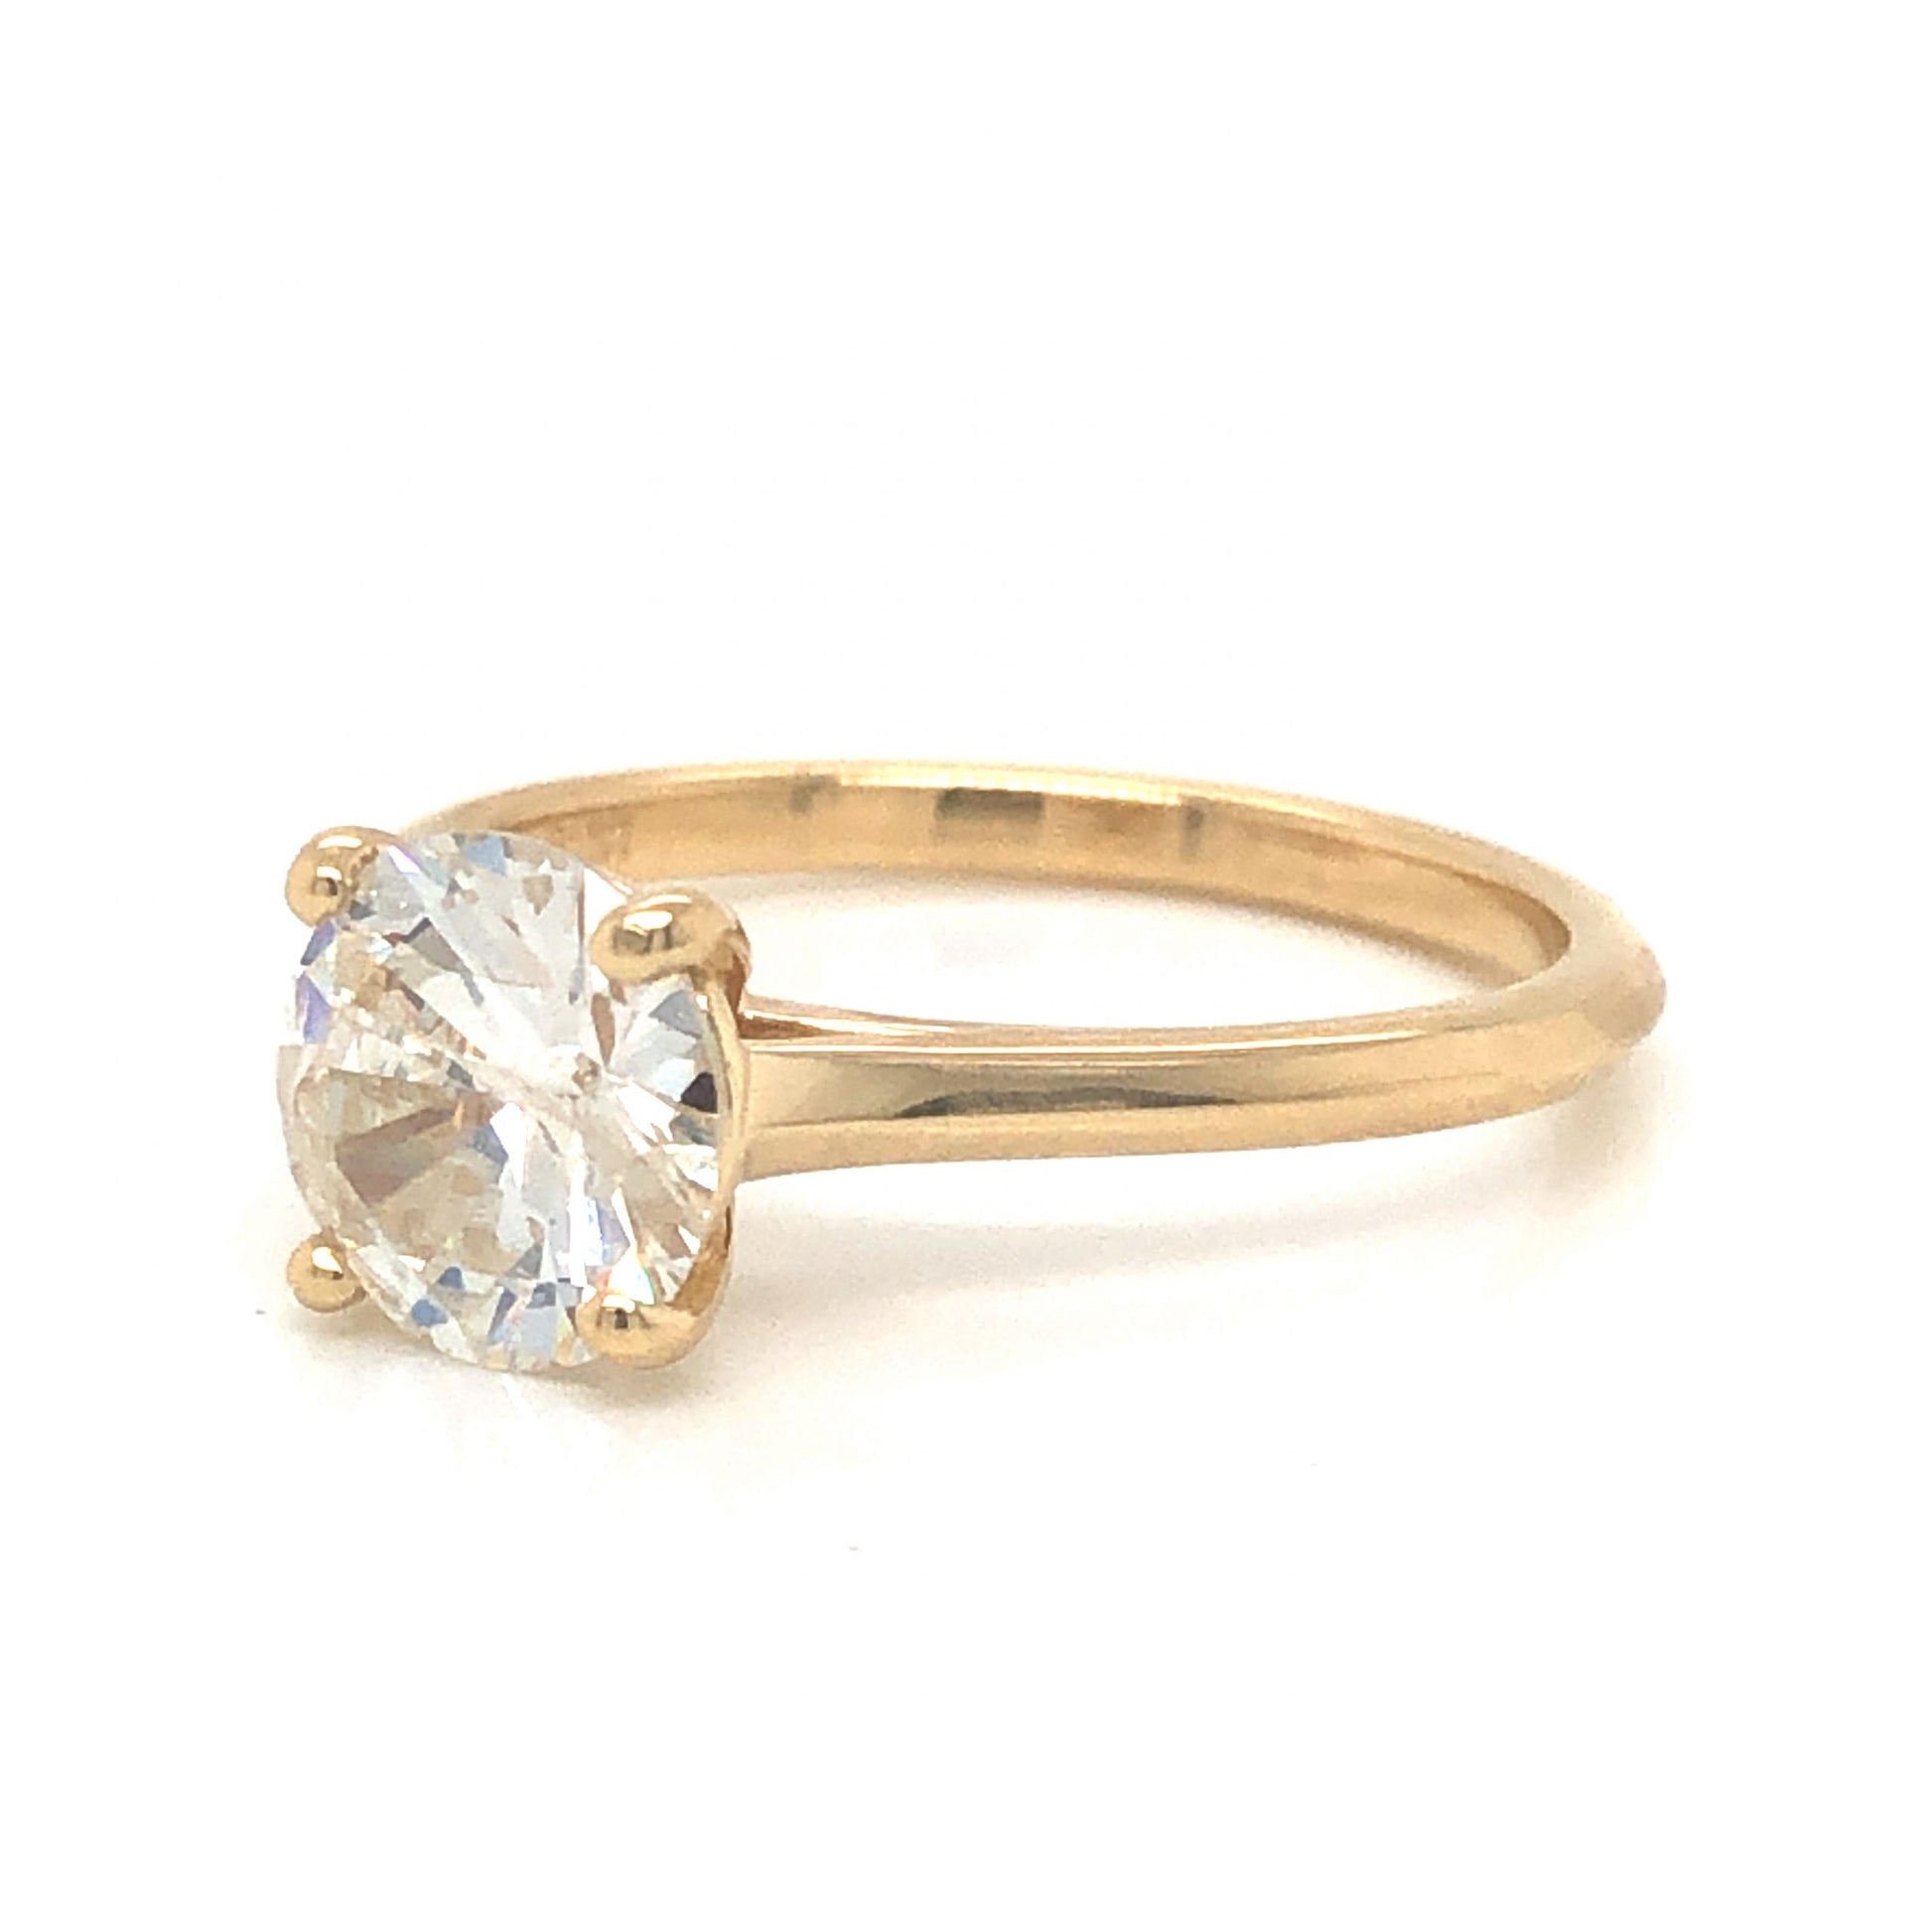 1.44 Solitaire Brilliant Cut Diamond Engagement Ring in 14K Yellow GoldComposition: 14 Karat Yellow Gold Ring Size: 7 Total Diamond Weight: 1.44ct Total Gram Weight: 2.8 g Inscription: 14k 
      